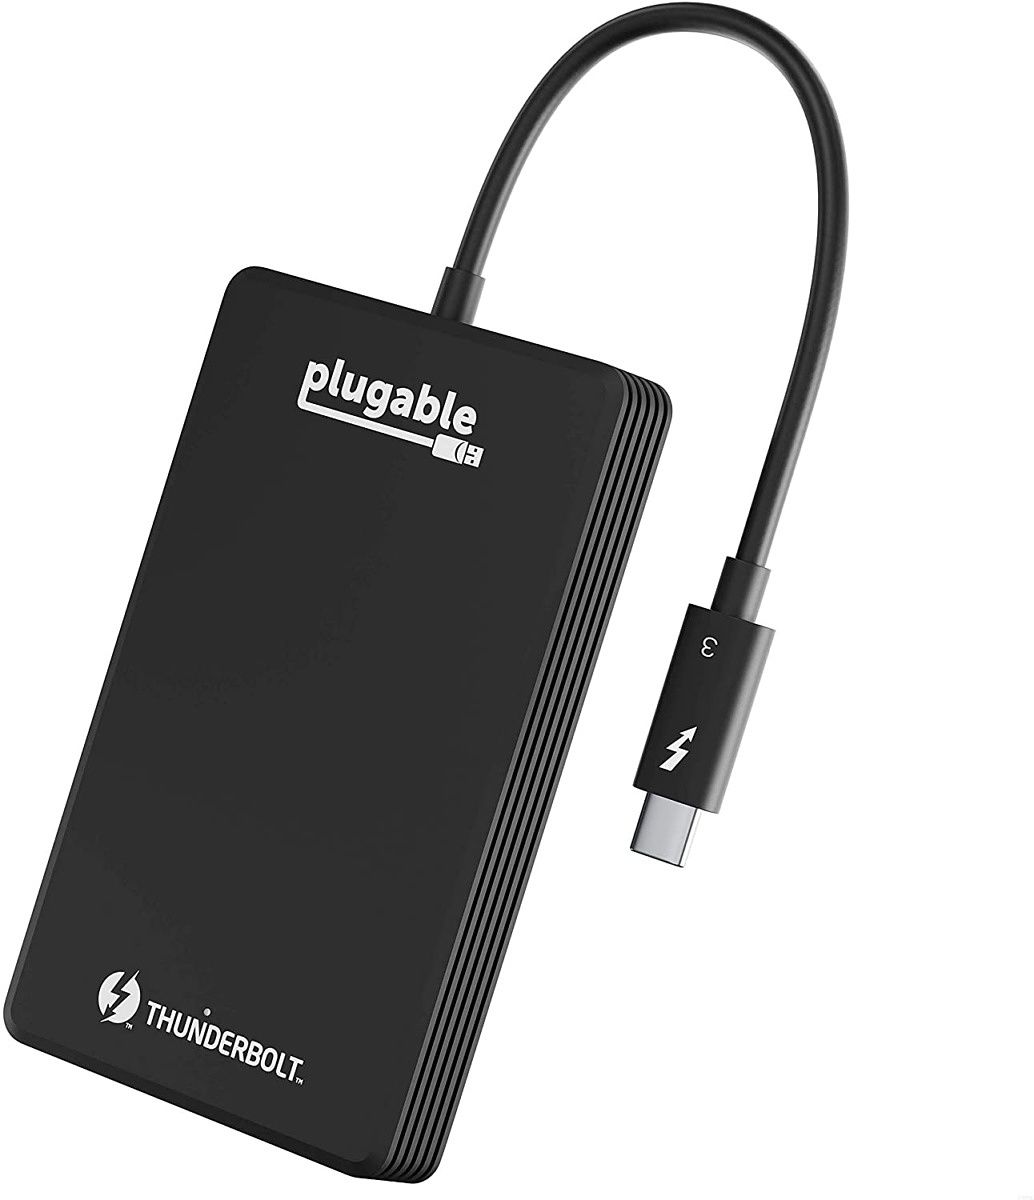 If you're worried about misplacing your cable, this SSD has it built right in. It also supports Thunderbolt, though speeds only go up to 2,400MB/s reads and 1,800 MB/s writes, which is still faster than most.